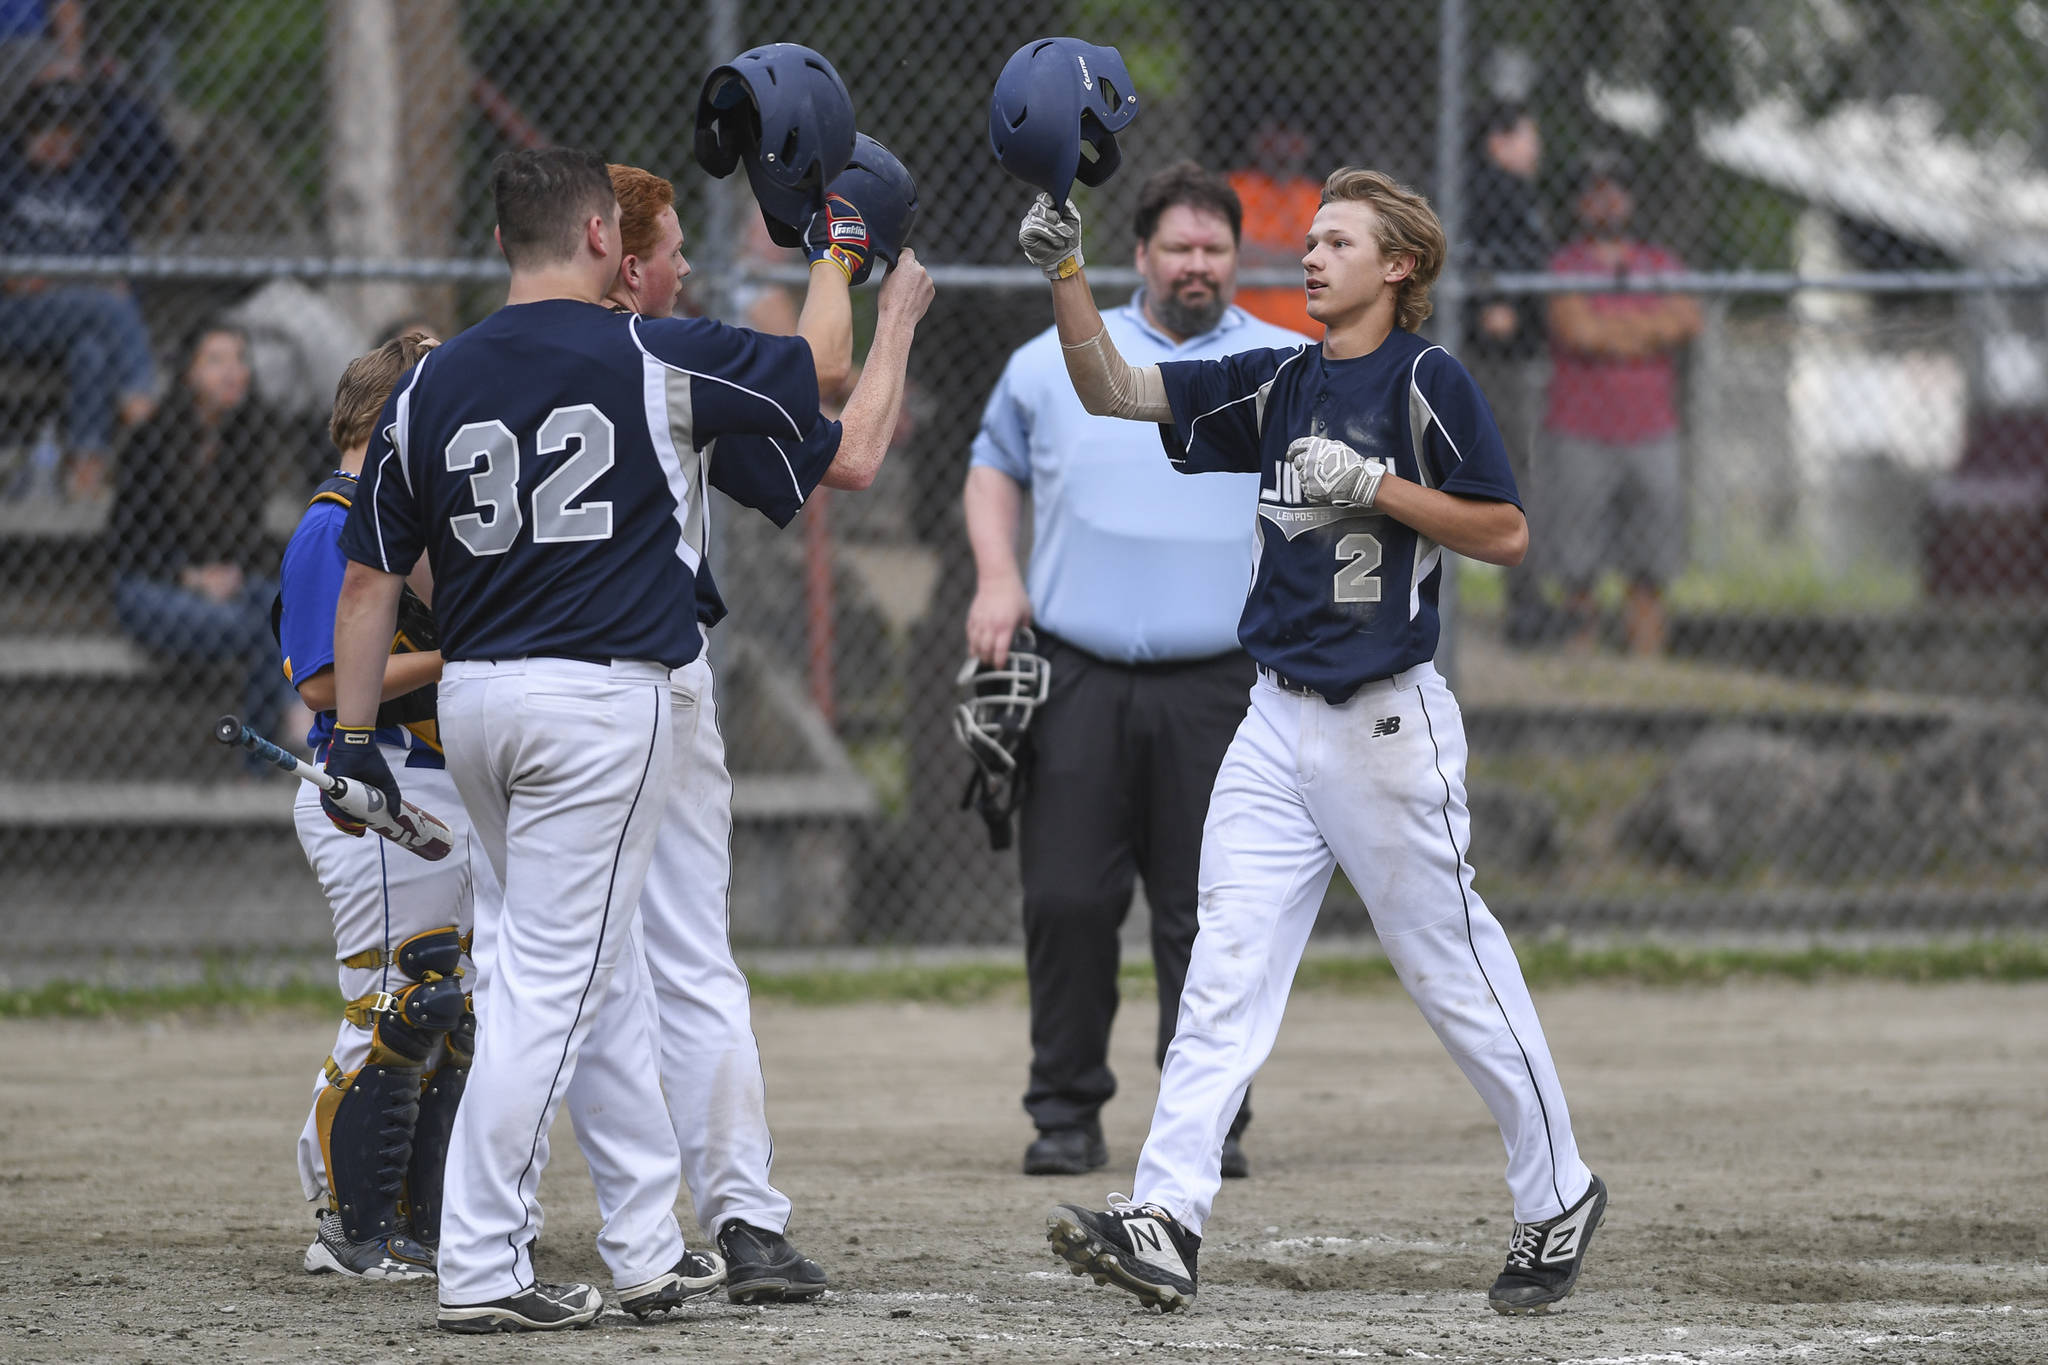 Juneau’s Gabe Storie, right, touches helmets with teammate Robert Cox and Luke Mallinger after hitting a two run homer in the fourth inning against Bartlett in Legion League baseball at Adair-Kennedy Memorial Park on Friday, June 21, 2019. (Michael Penn | Juneau Empire File)